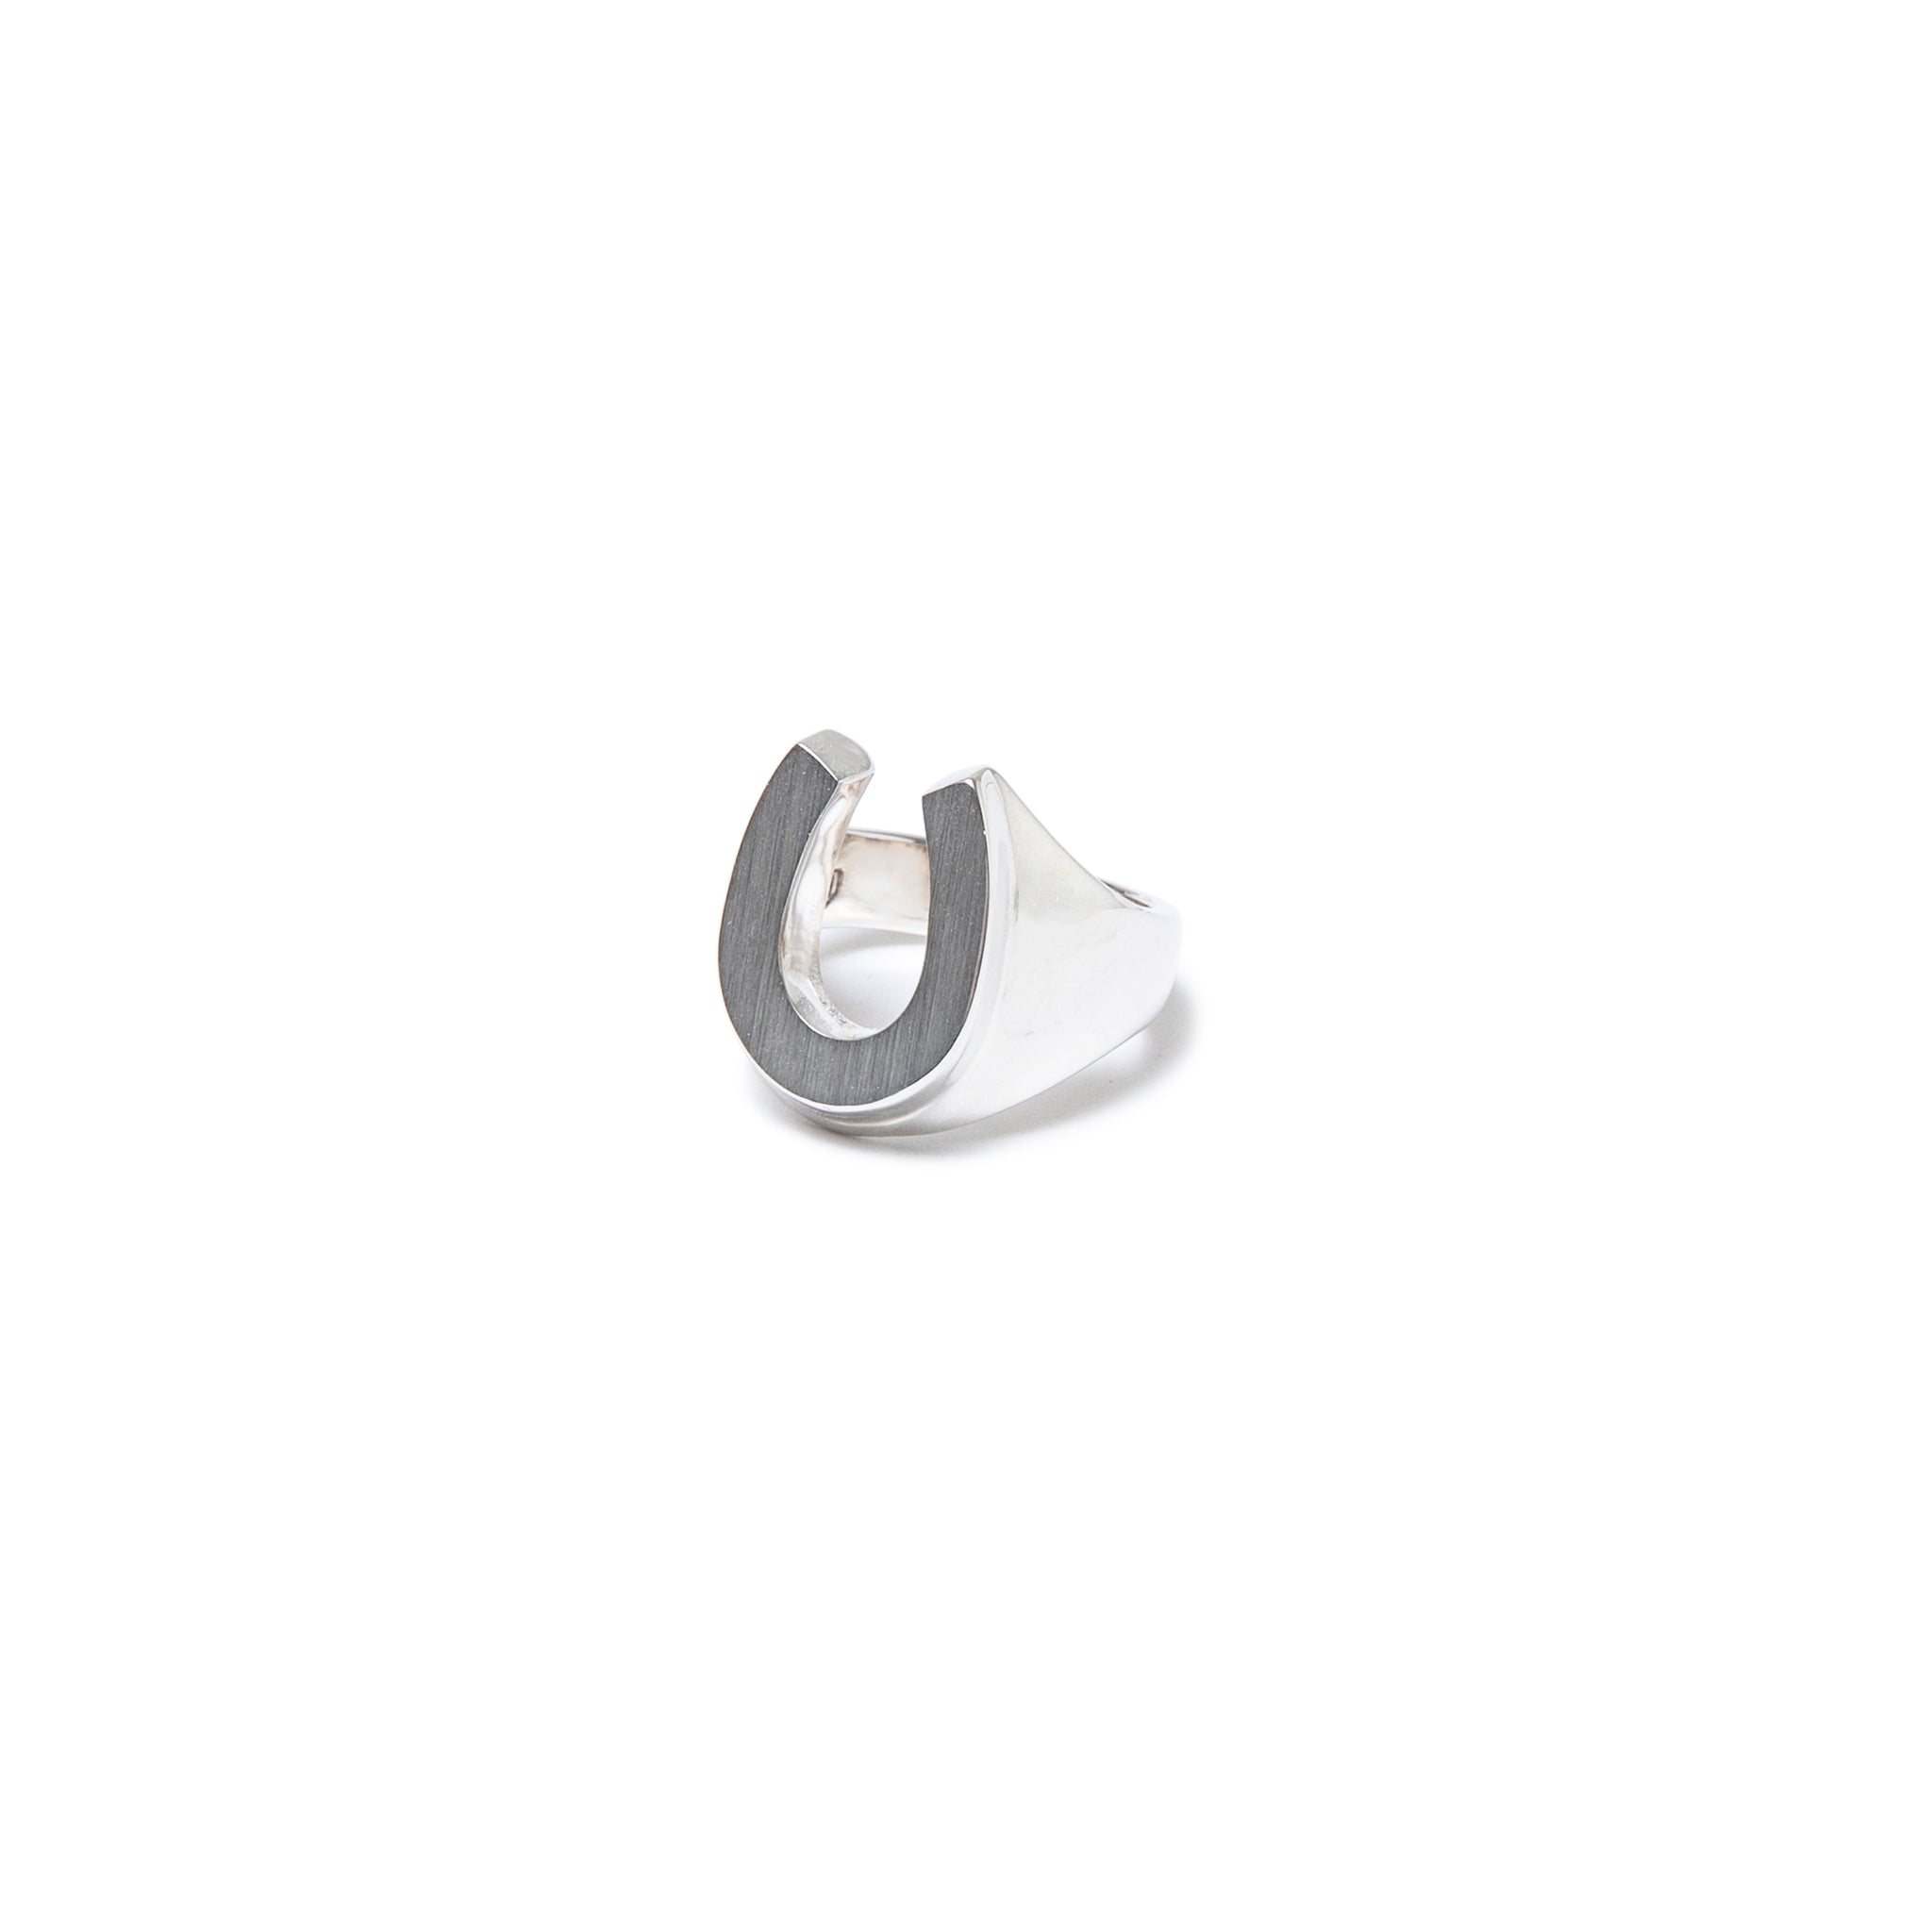 HORSE SHOE RING SILVER – JOLLY ROGER